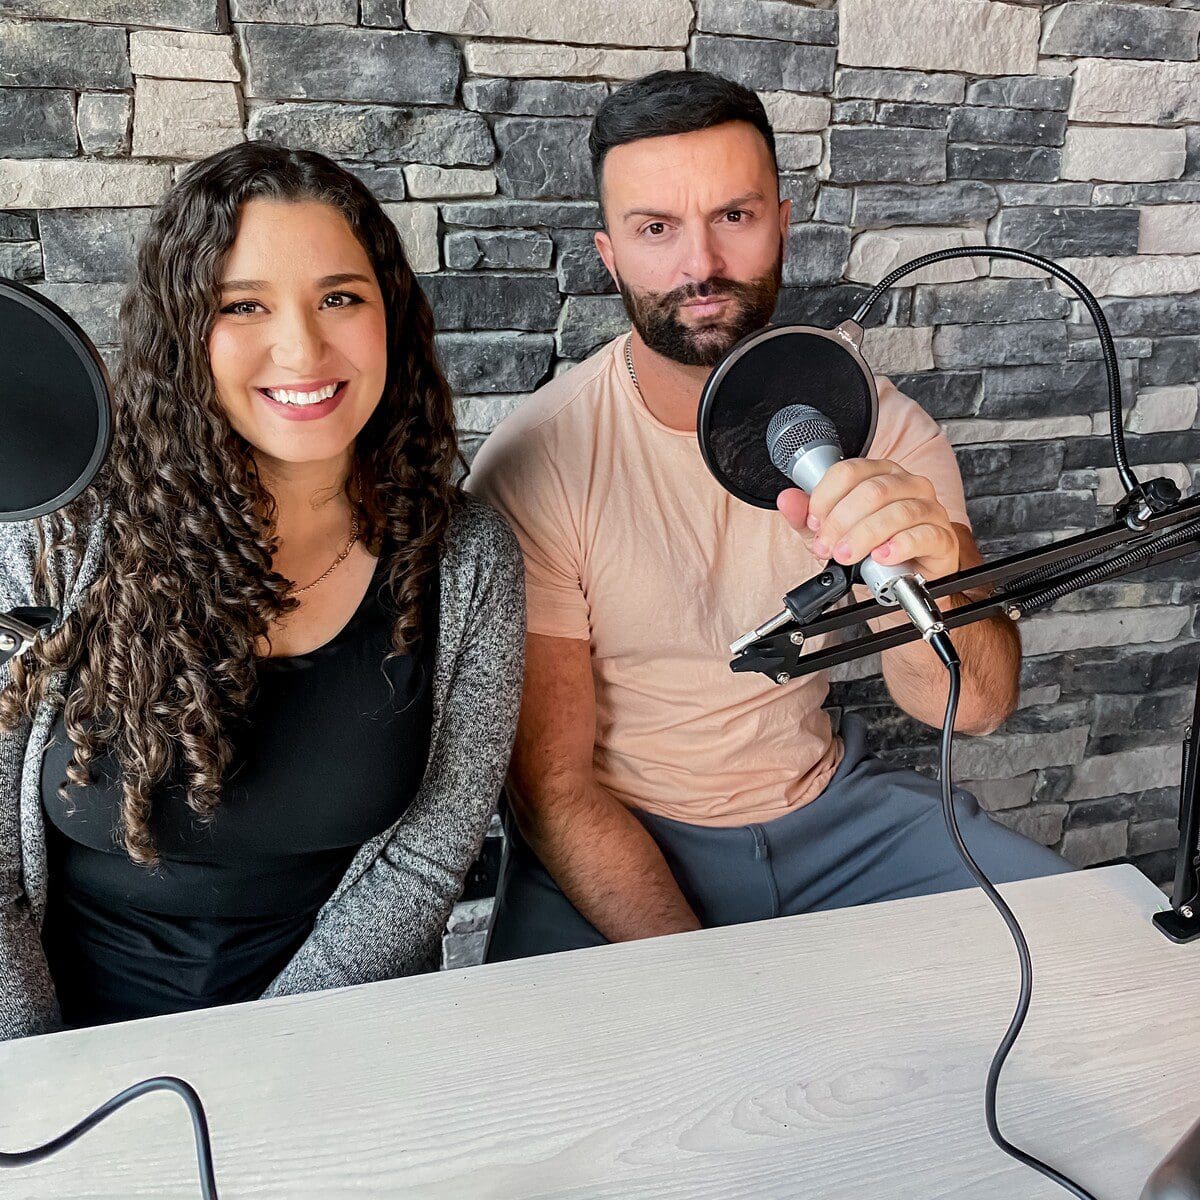 Megan and Anthony recording their first podcast